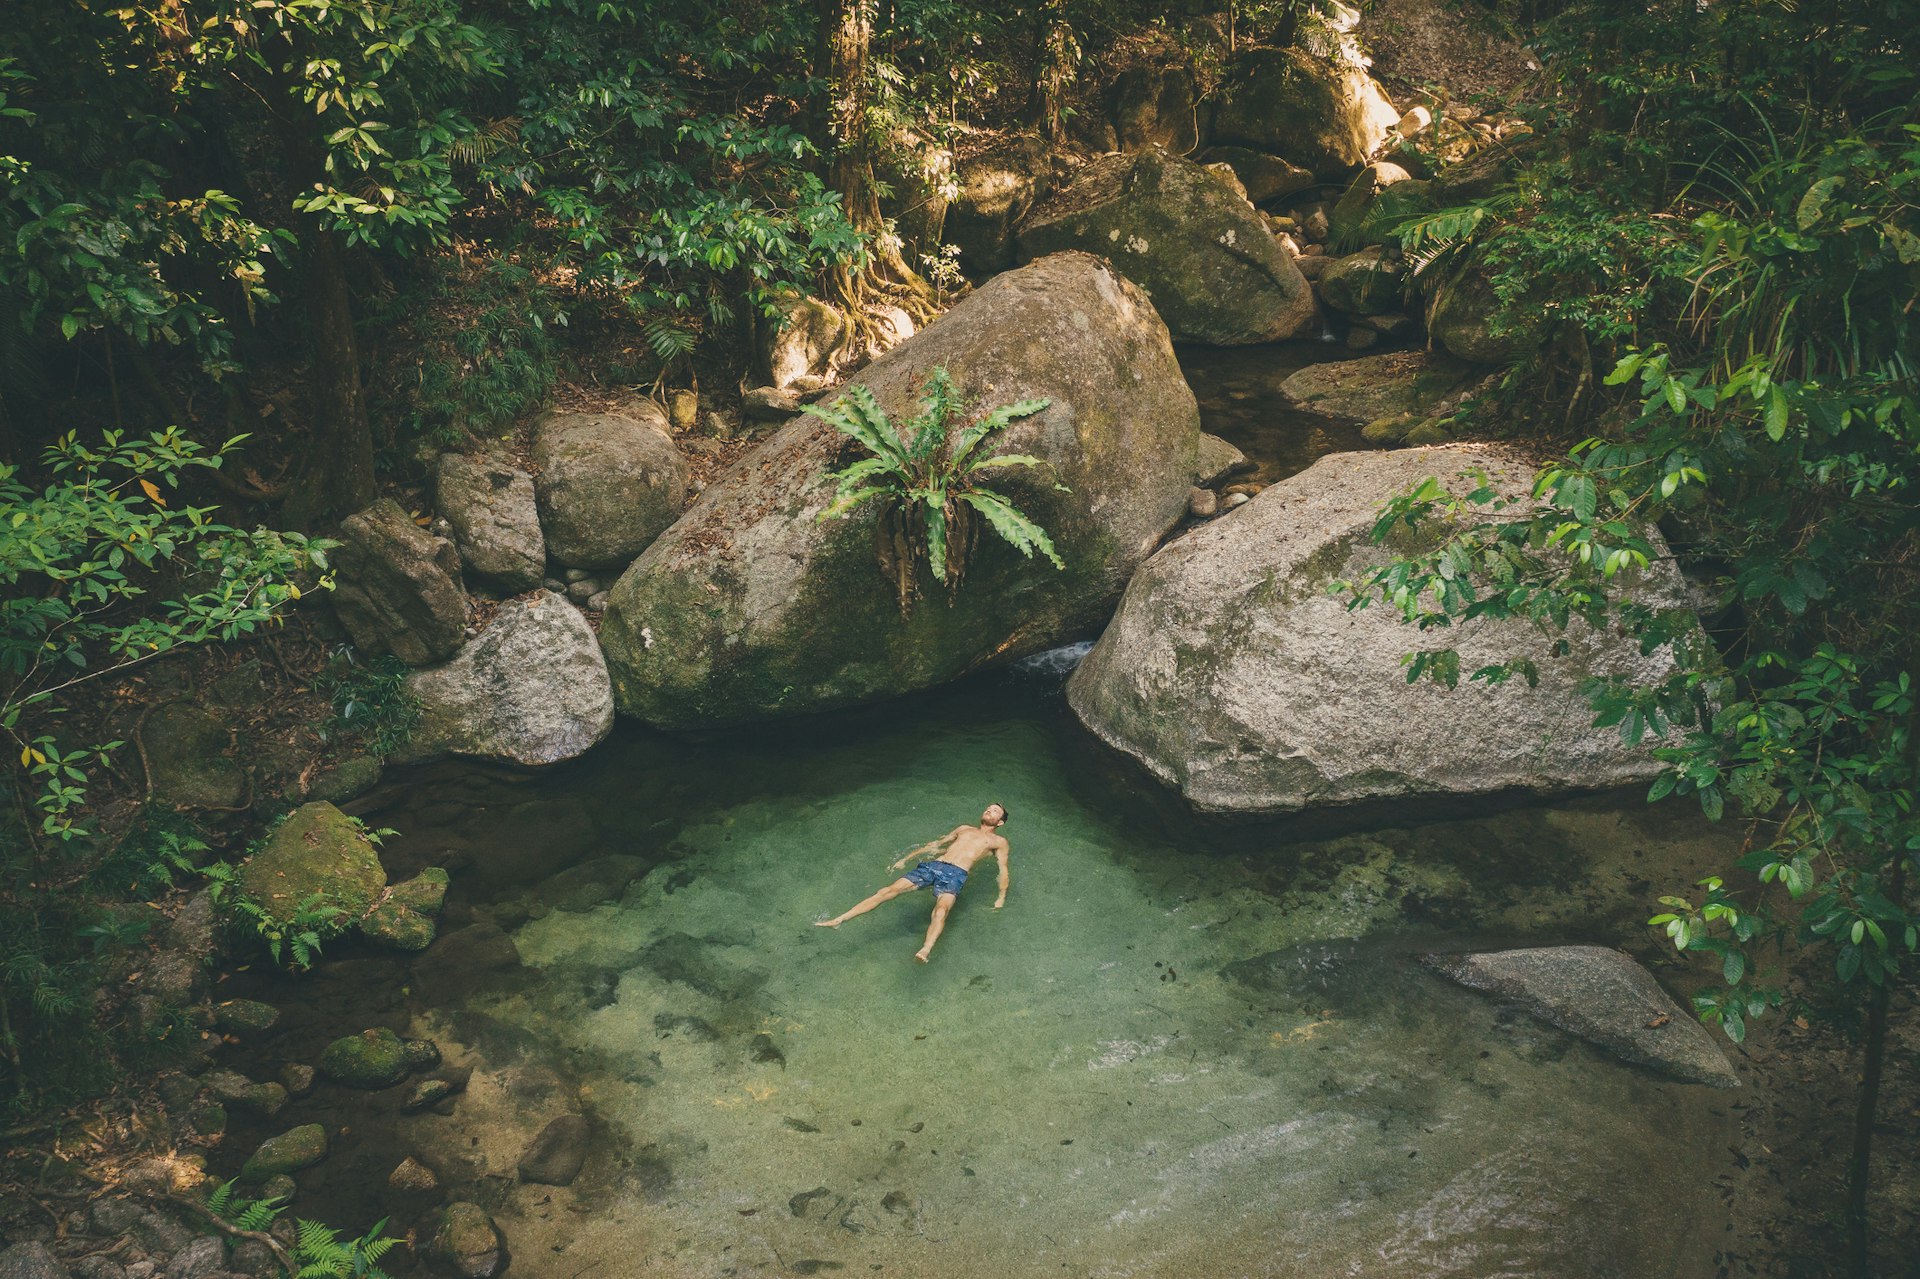 A man in swimwear lies in a natural pool gazing up at the rainforest that surrounds him